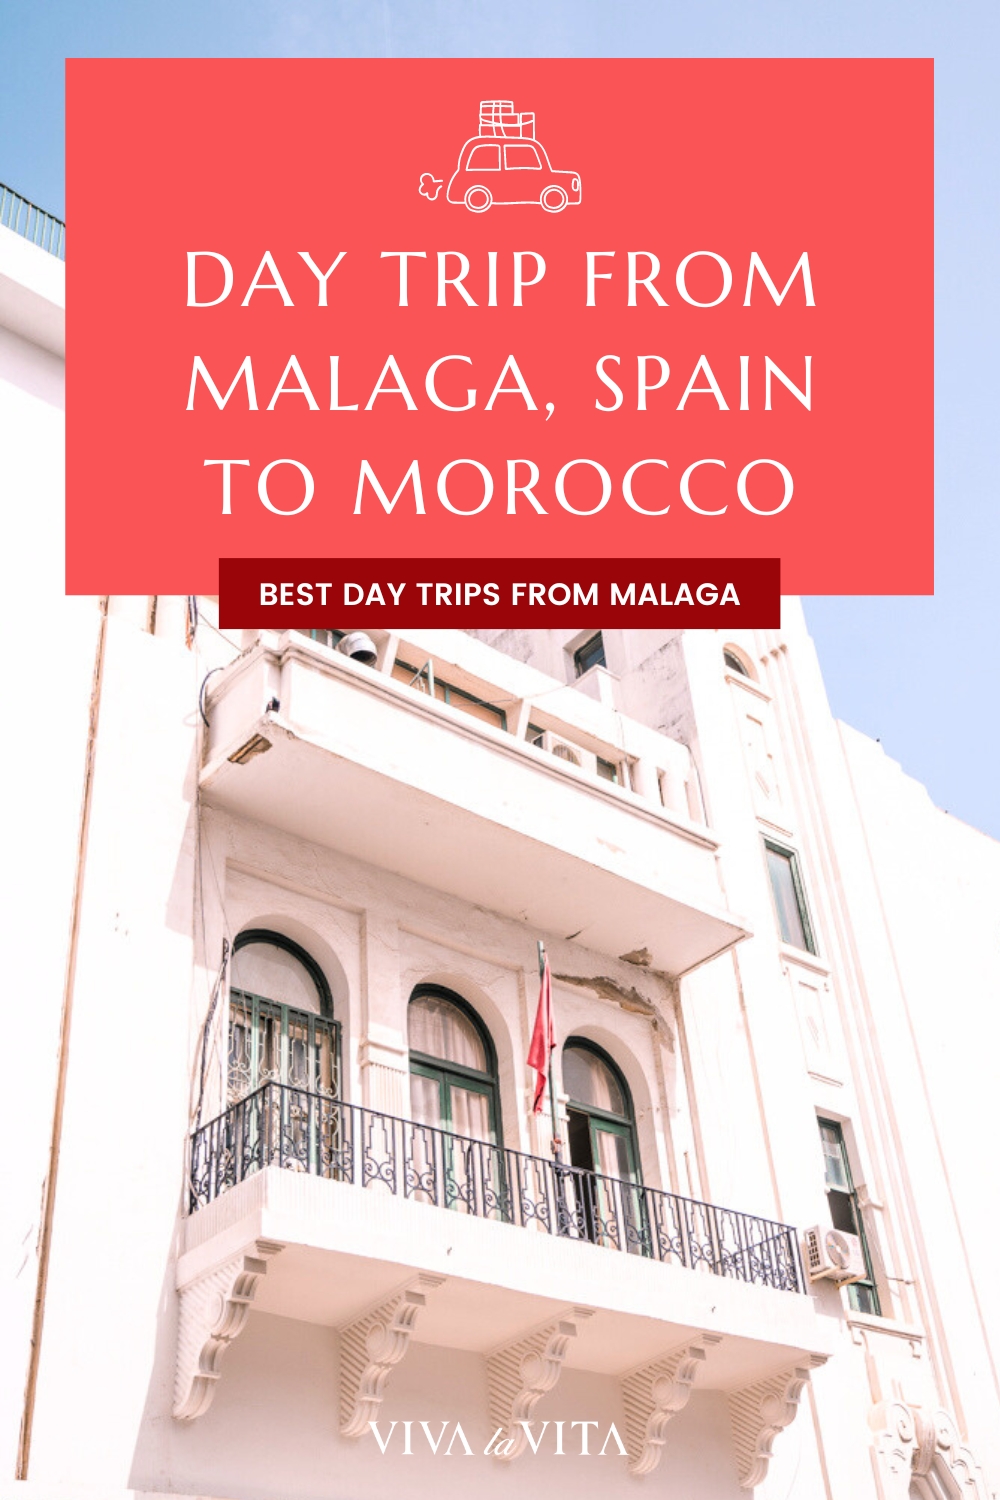 pinterest image showing a building in Tetouan, Morocco with a headline: day trip from malaga spain to morocco, best day trips from malaga